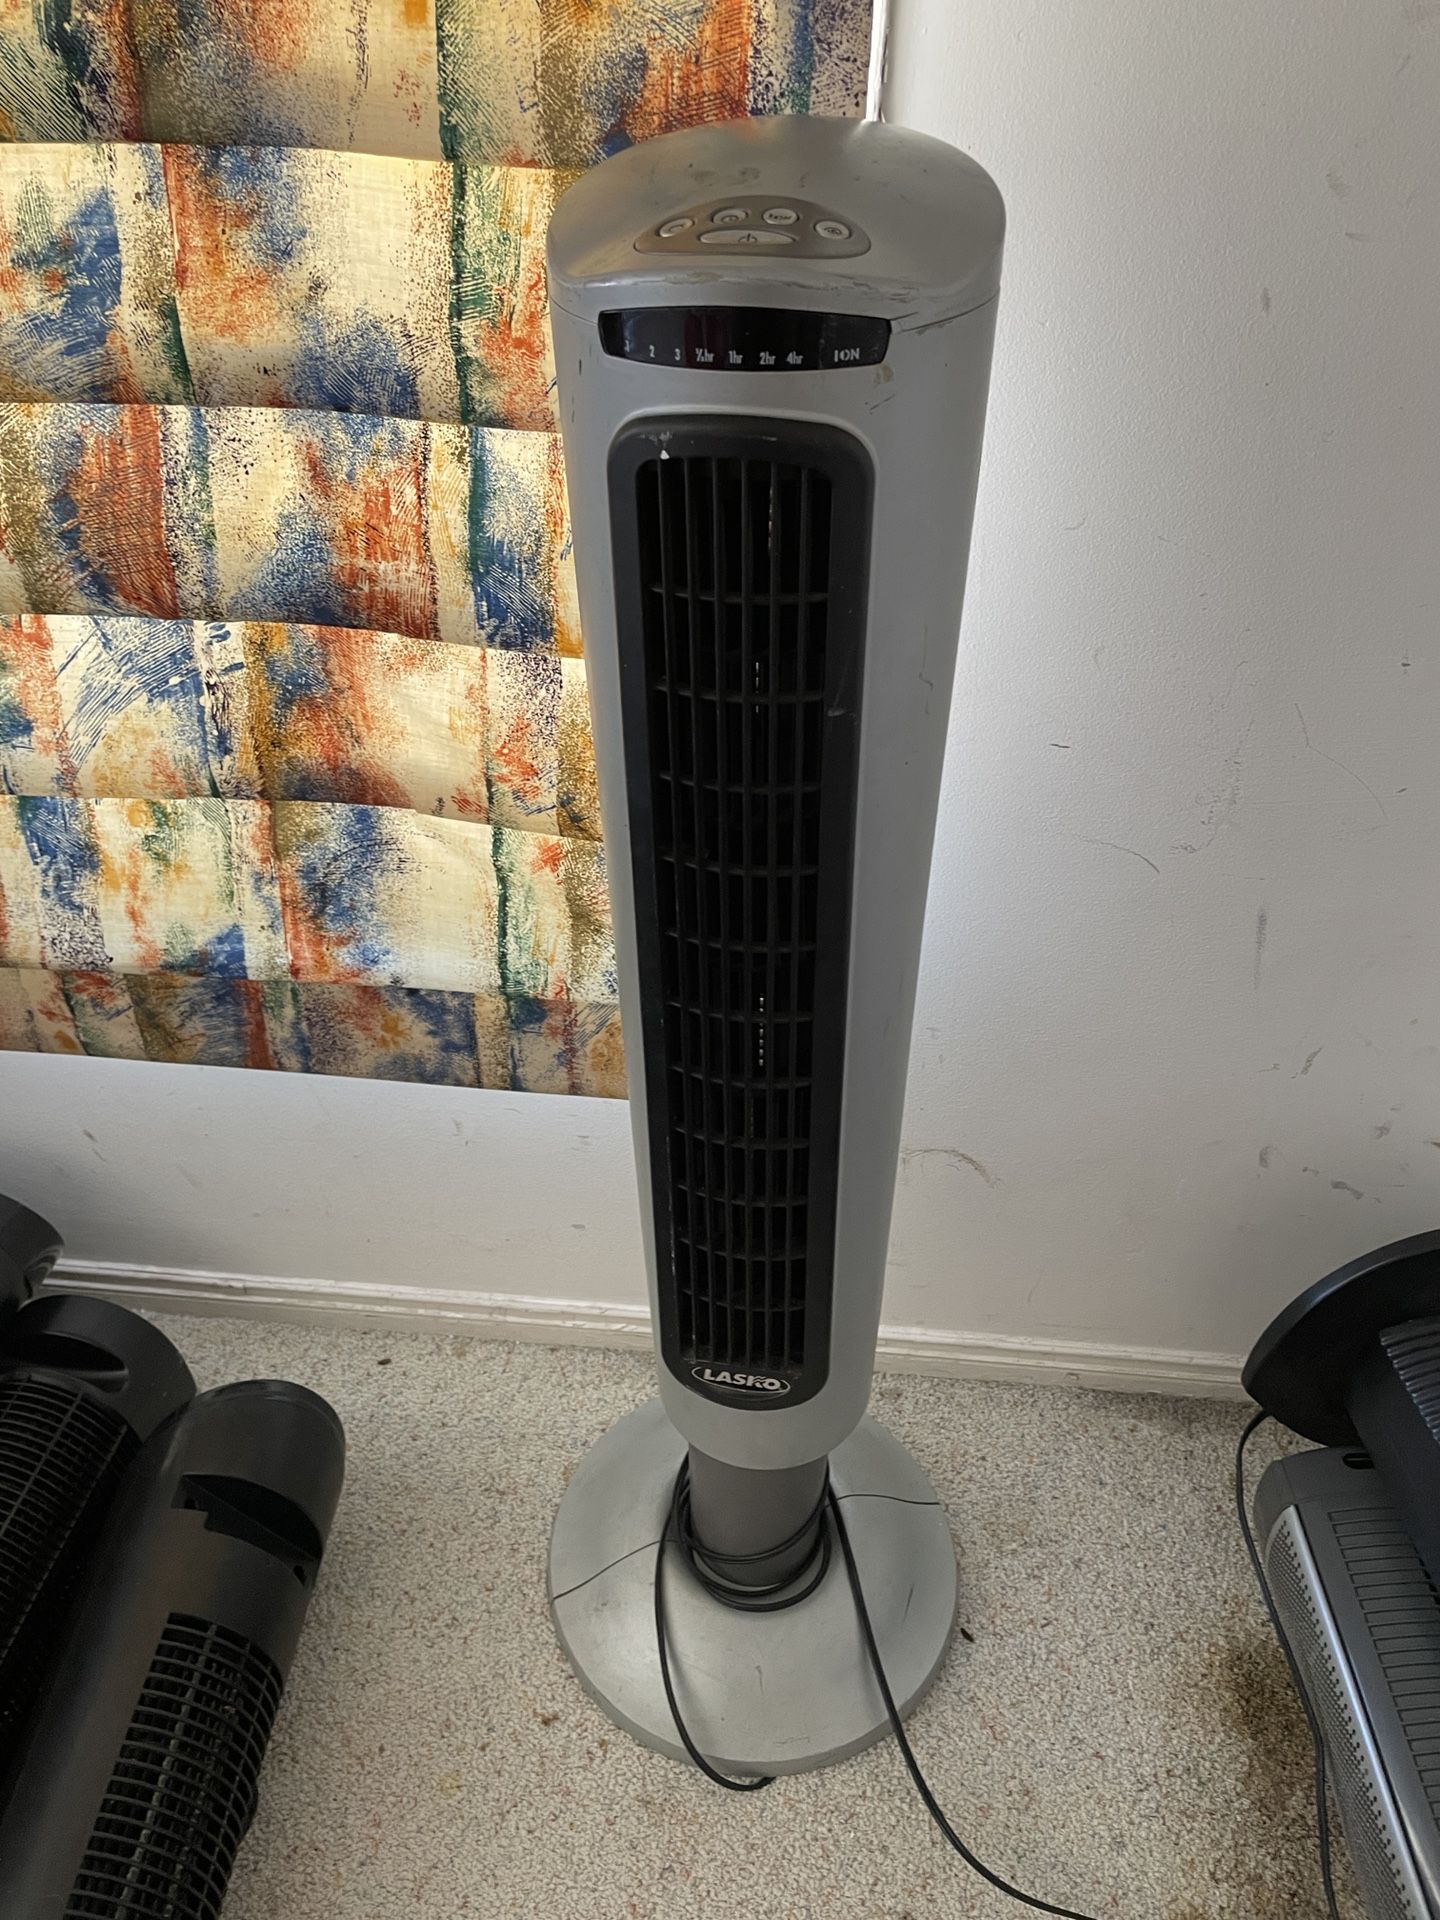 Like New Lasko Tower Fan Tested Works Perfectly when you come ill fully test it for you 